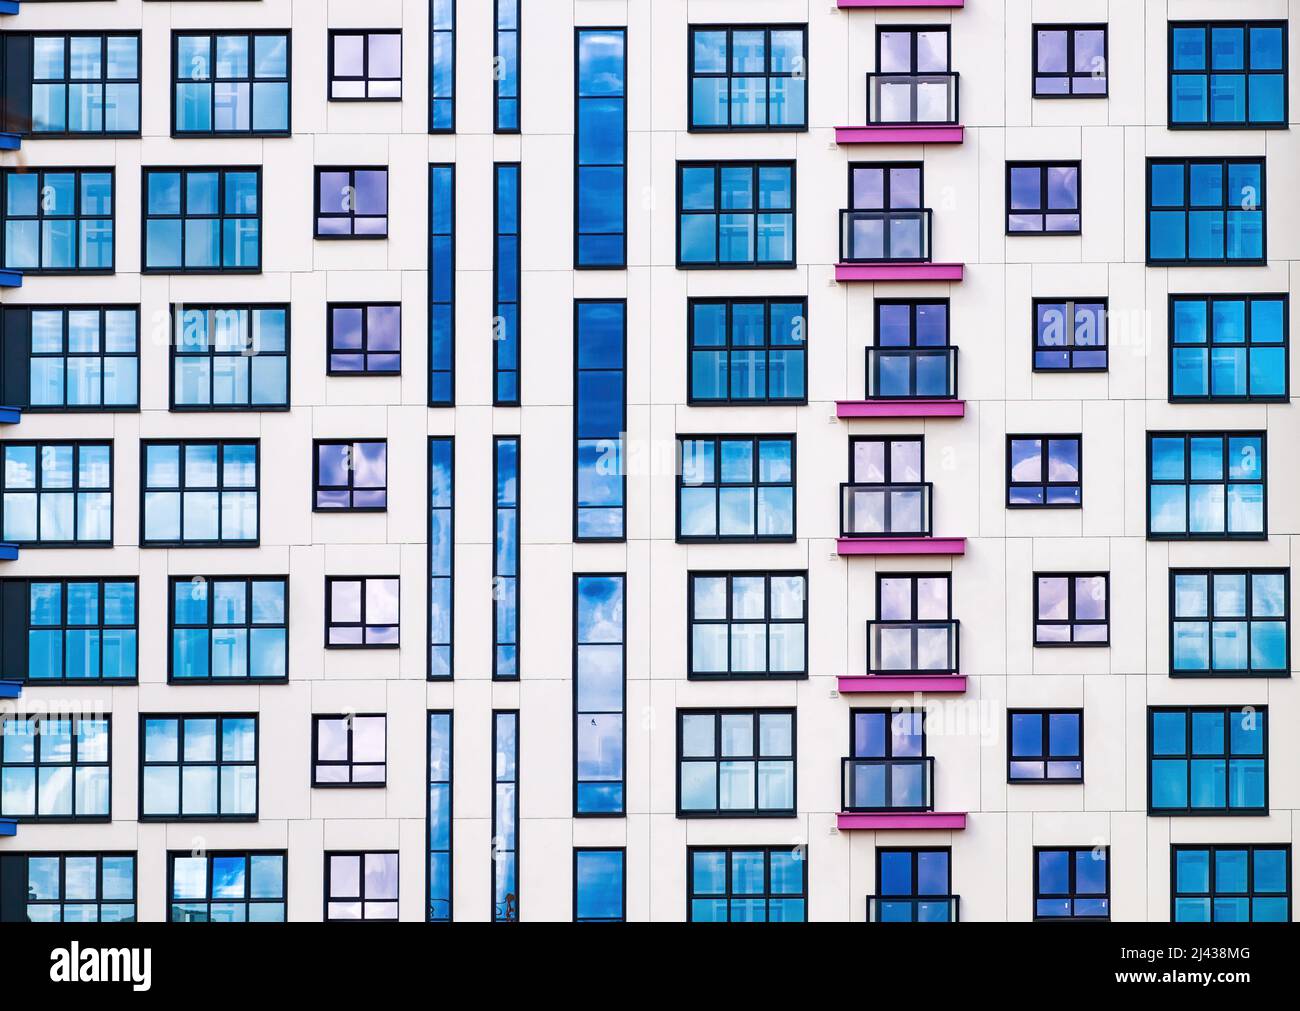 A brightly colored facade of a residential building. Abstract background of colored windows. Stock Photo